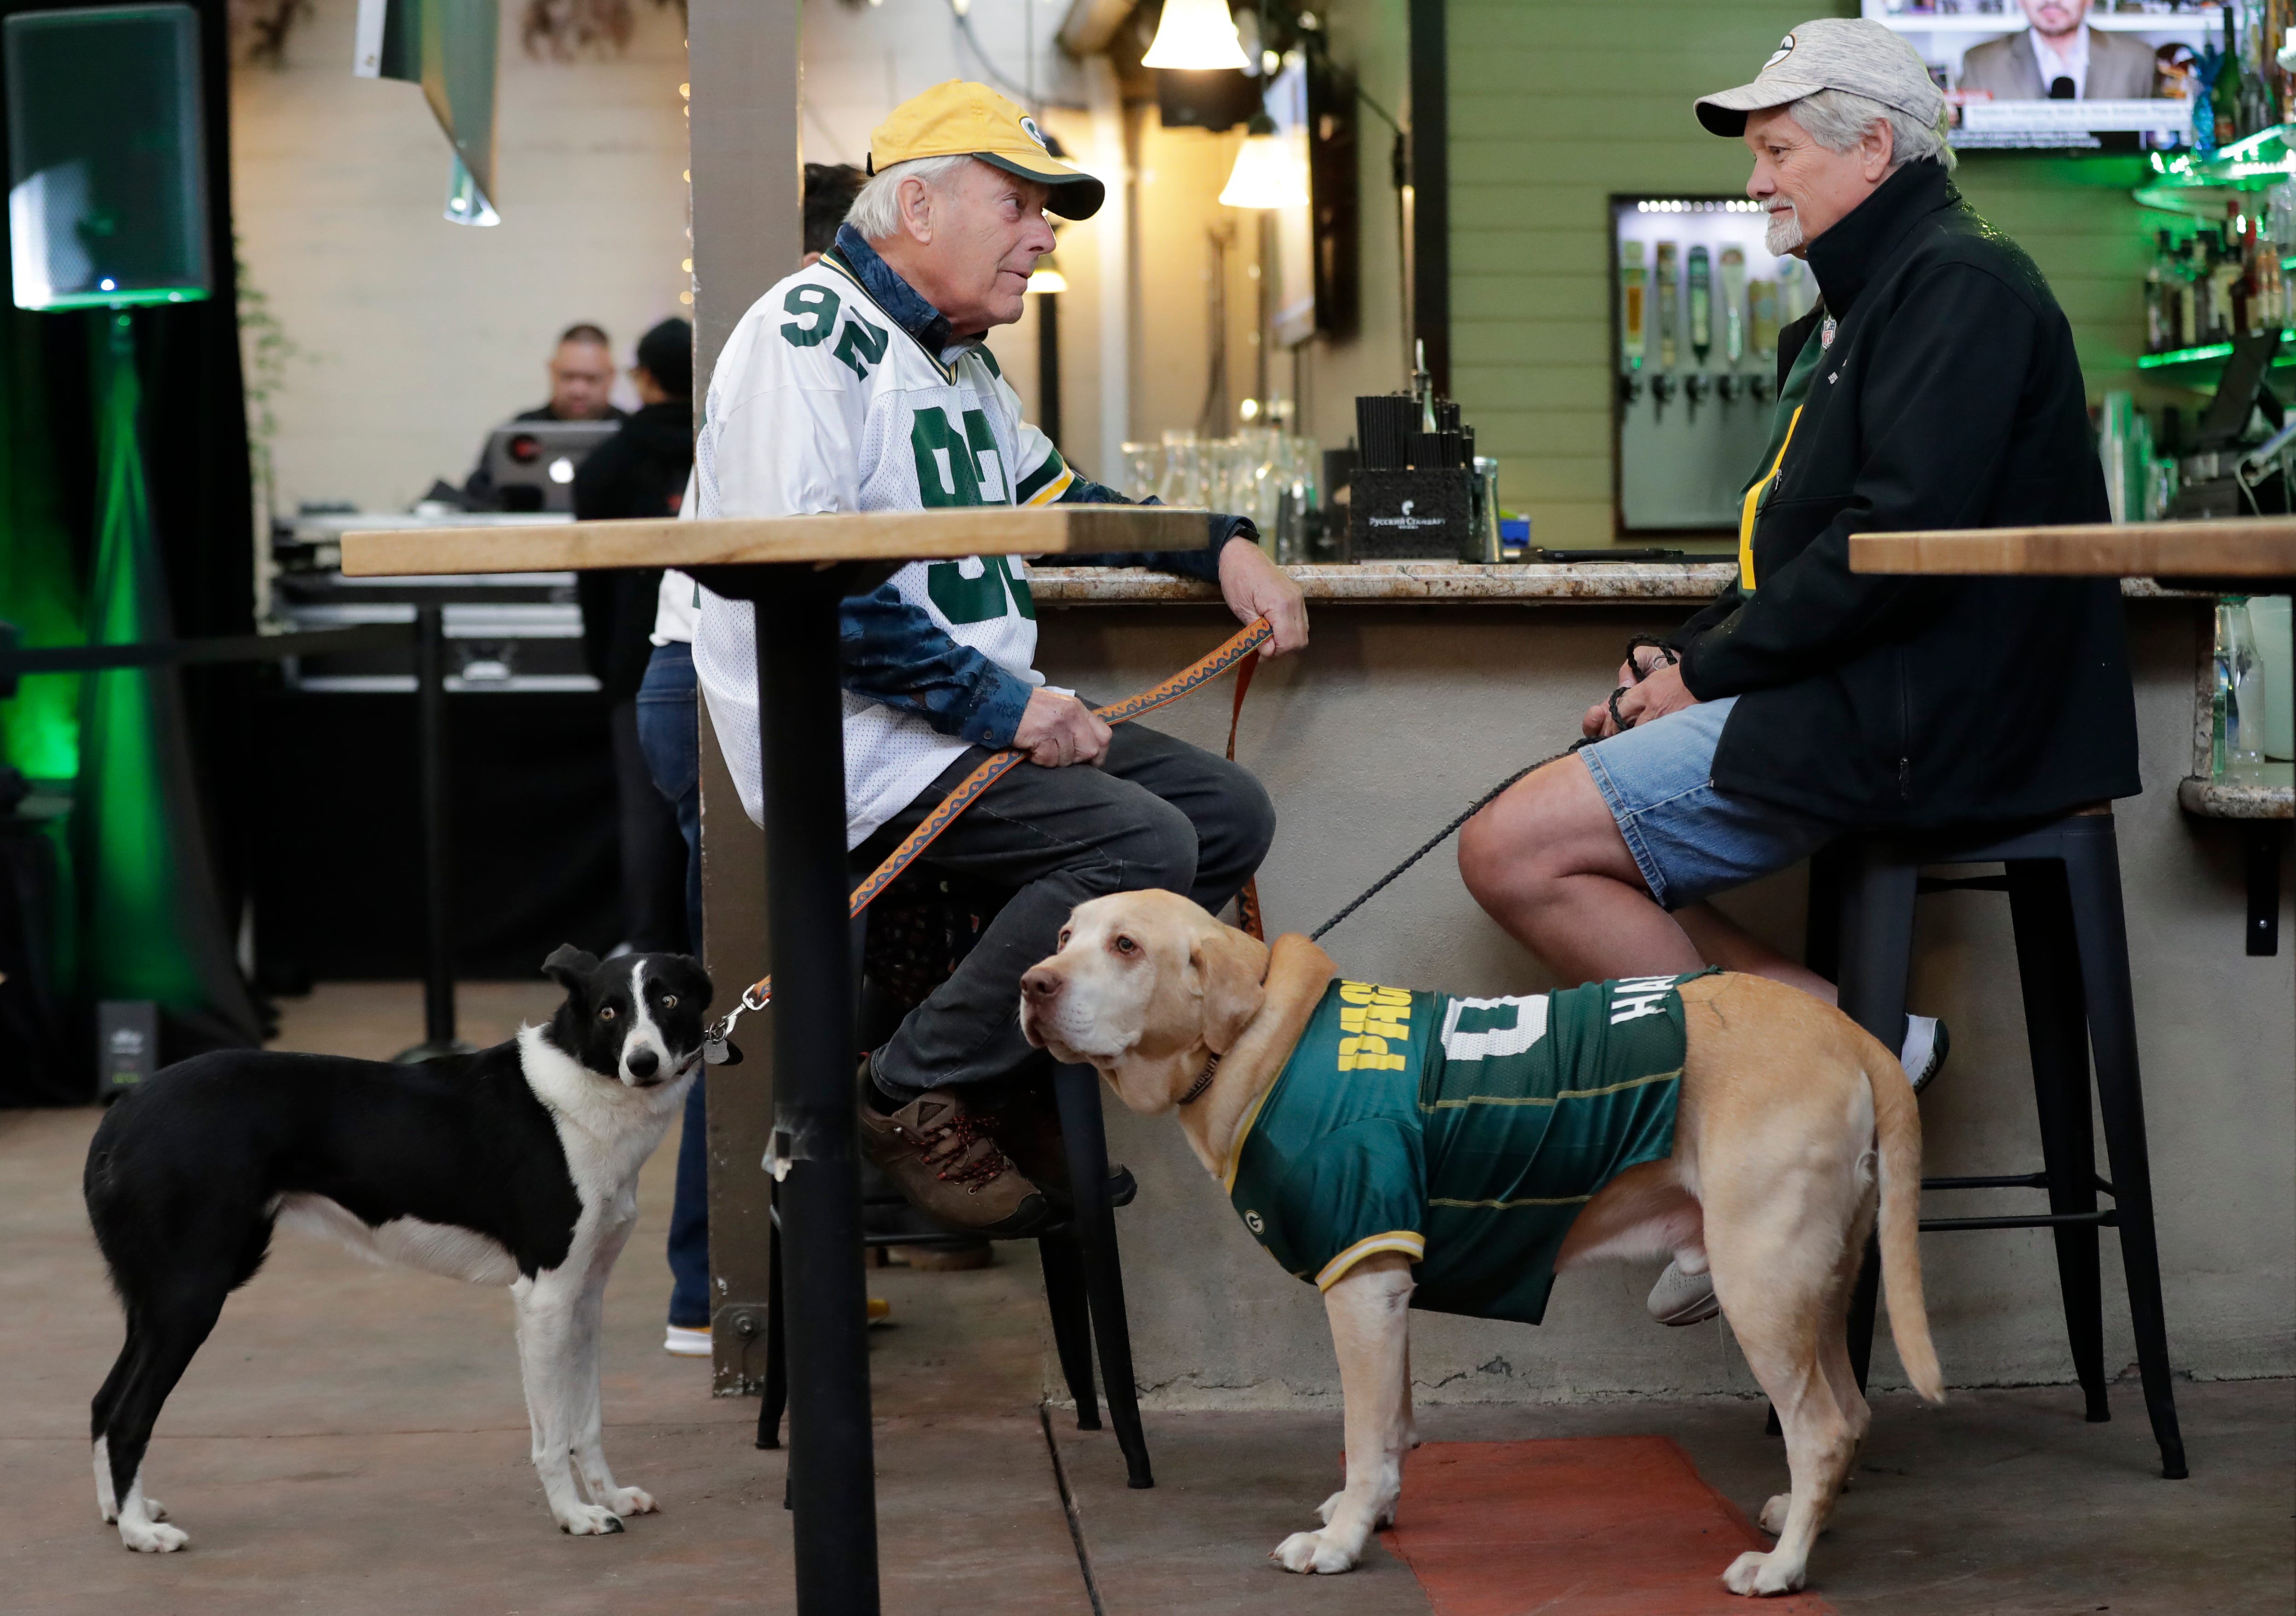 Green Bay Packers fans John Smit, left, of California and his dog Josie hangs out with Tony Smet and his dog Harley shortly before the start of the Packers Everywhere pep rally Friday, January 19, 2024, at The Patio in Palo Alto, California.